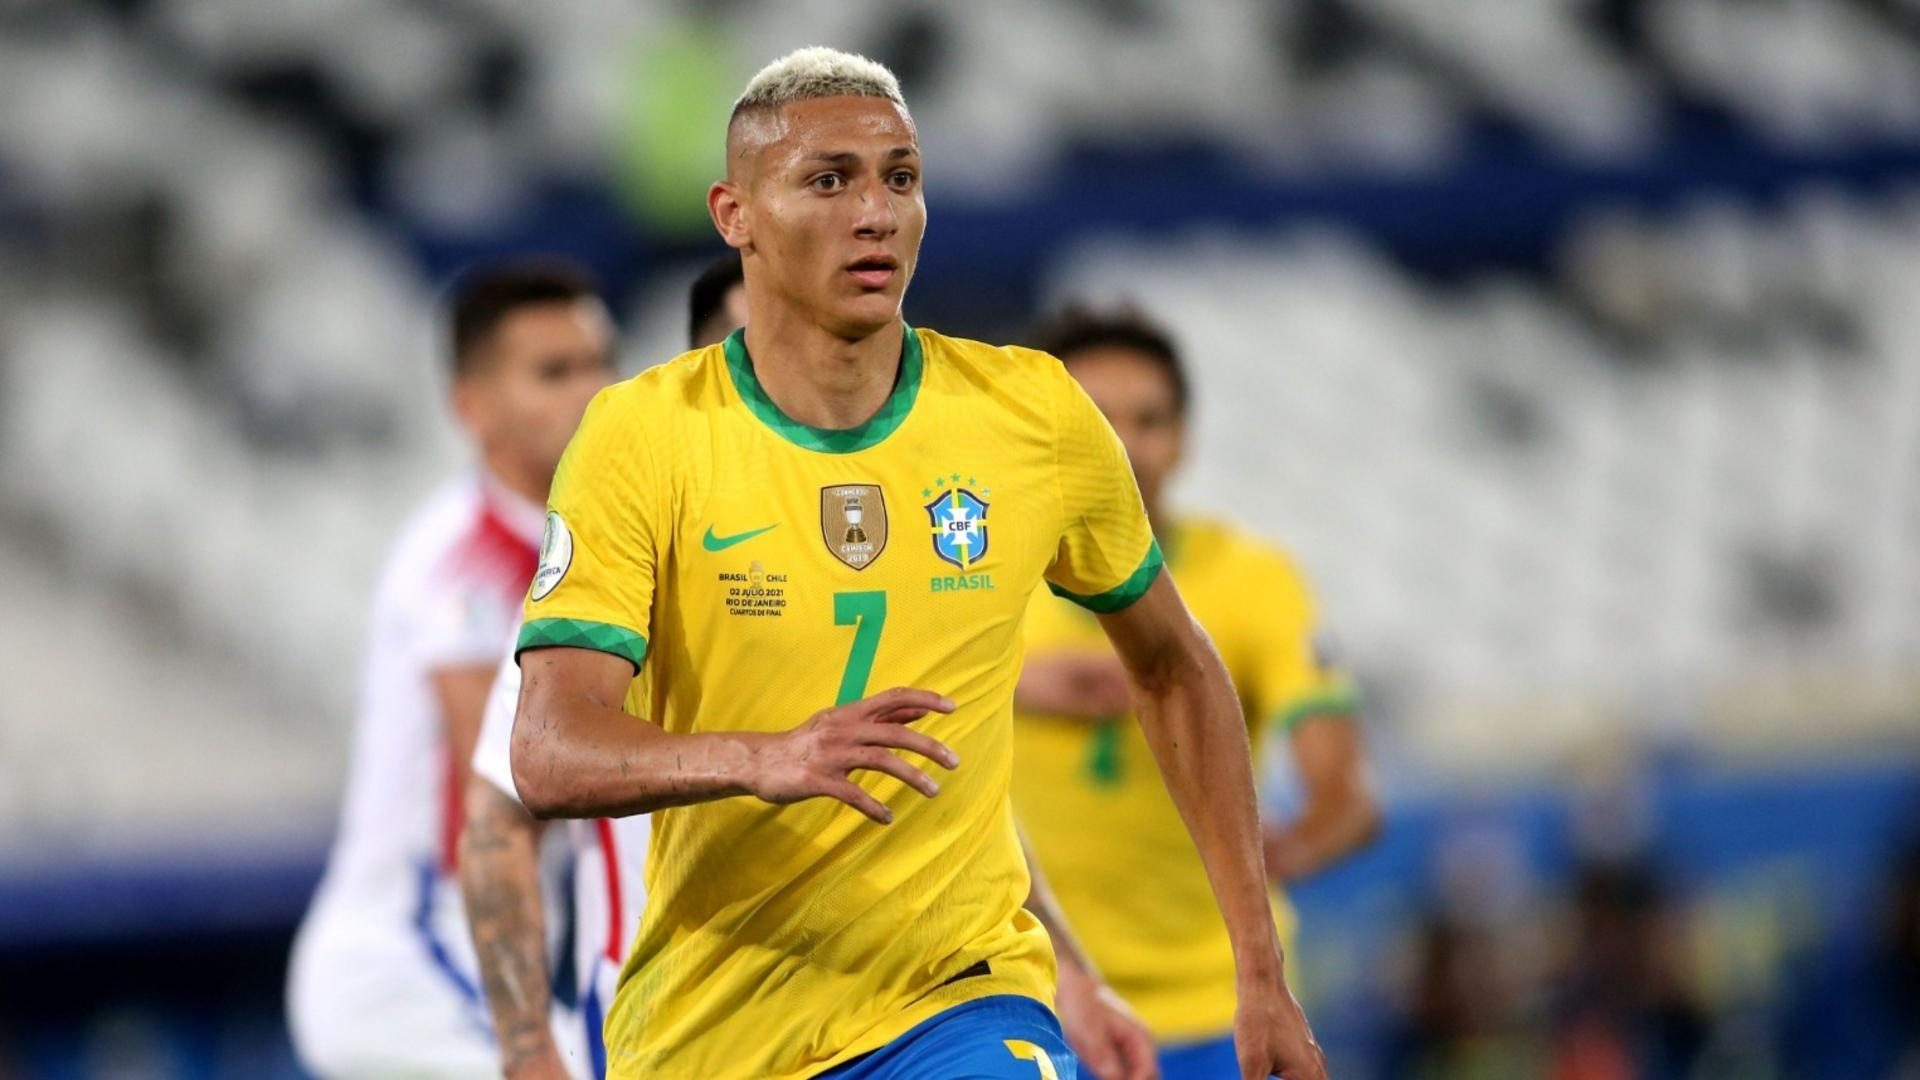 FIFA 2022 World Cup Recap: Two games, two wins for Brazil - The Bent Musket